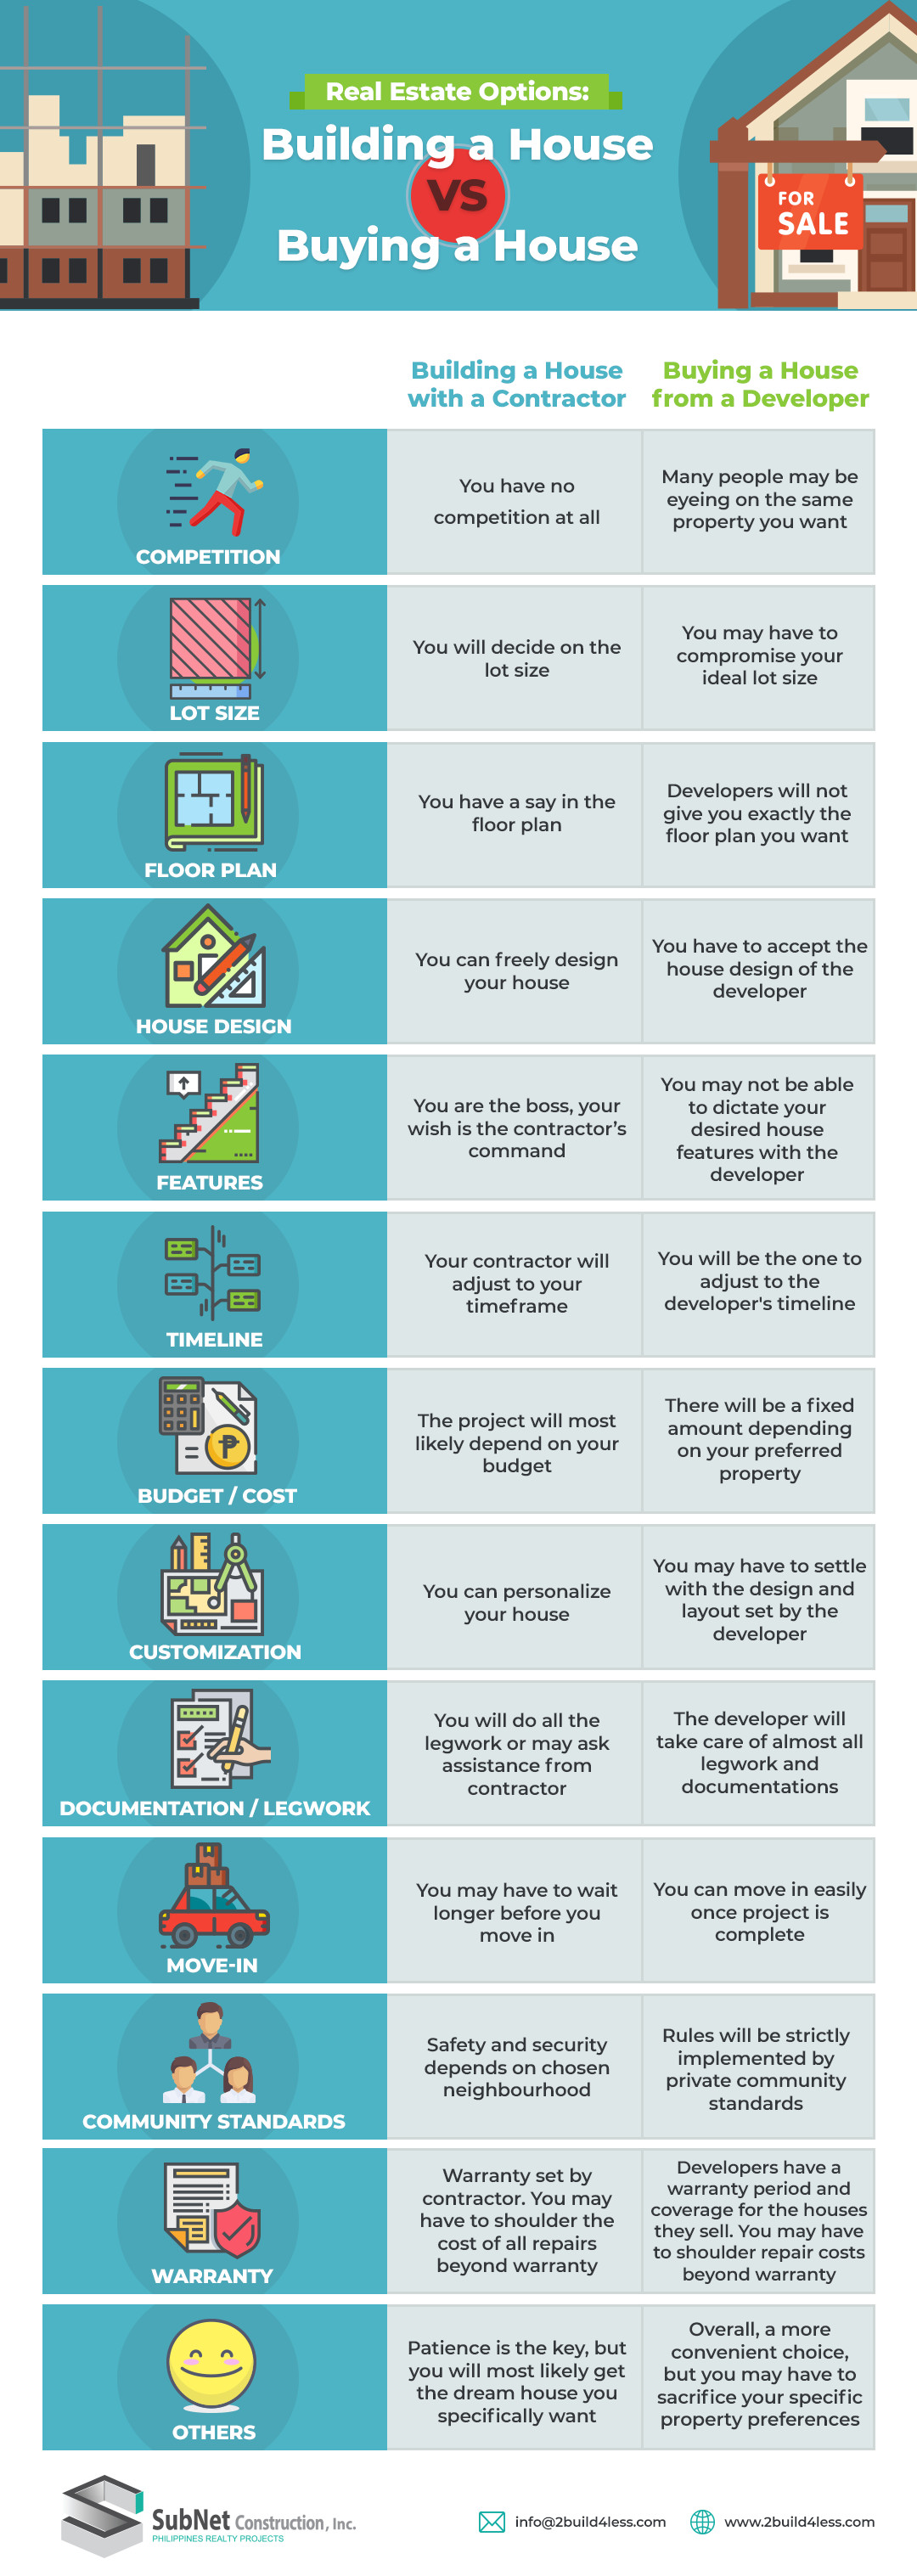 Building a House vs Buying a House_Infographic